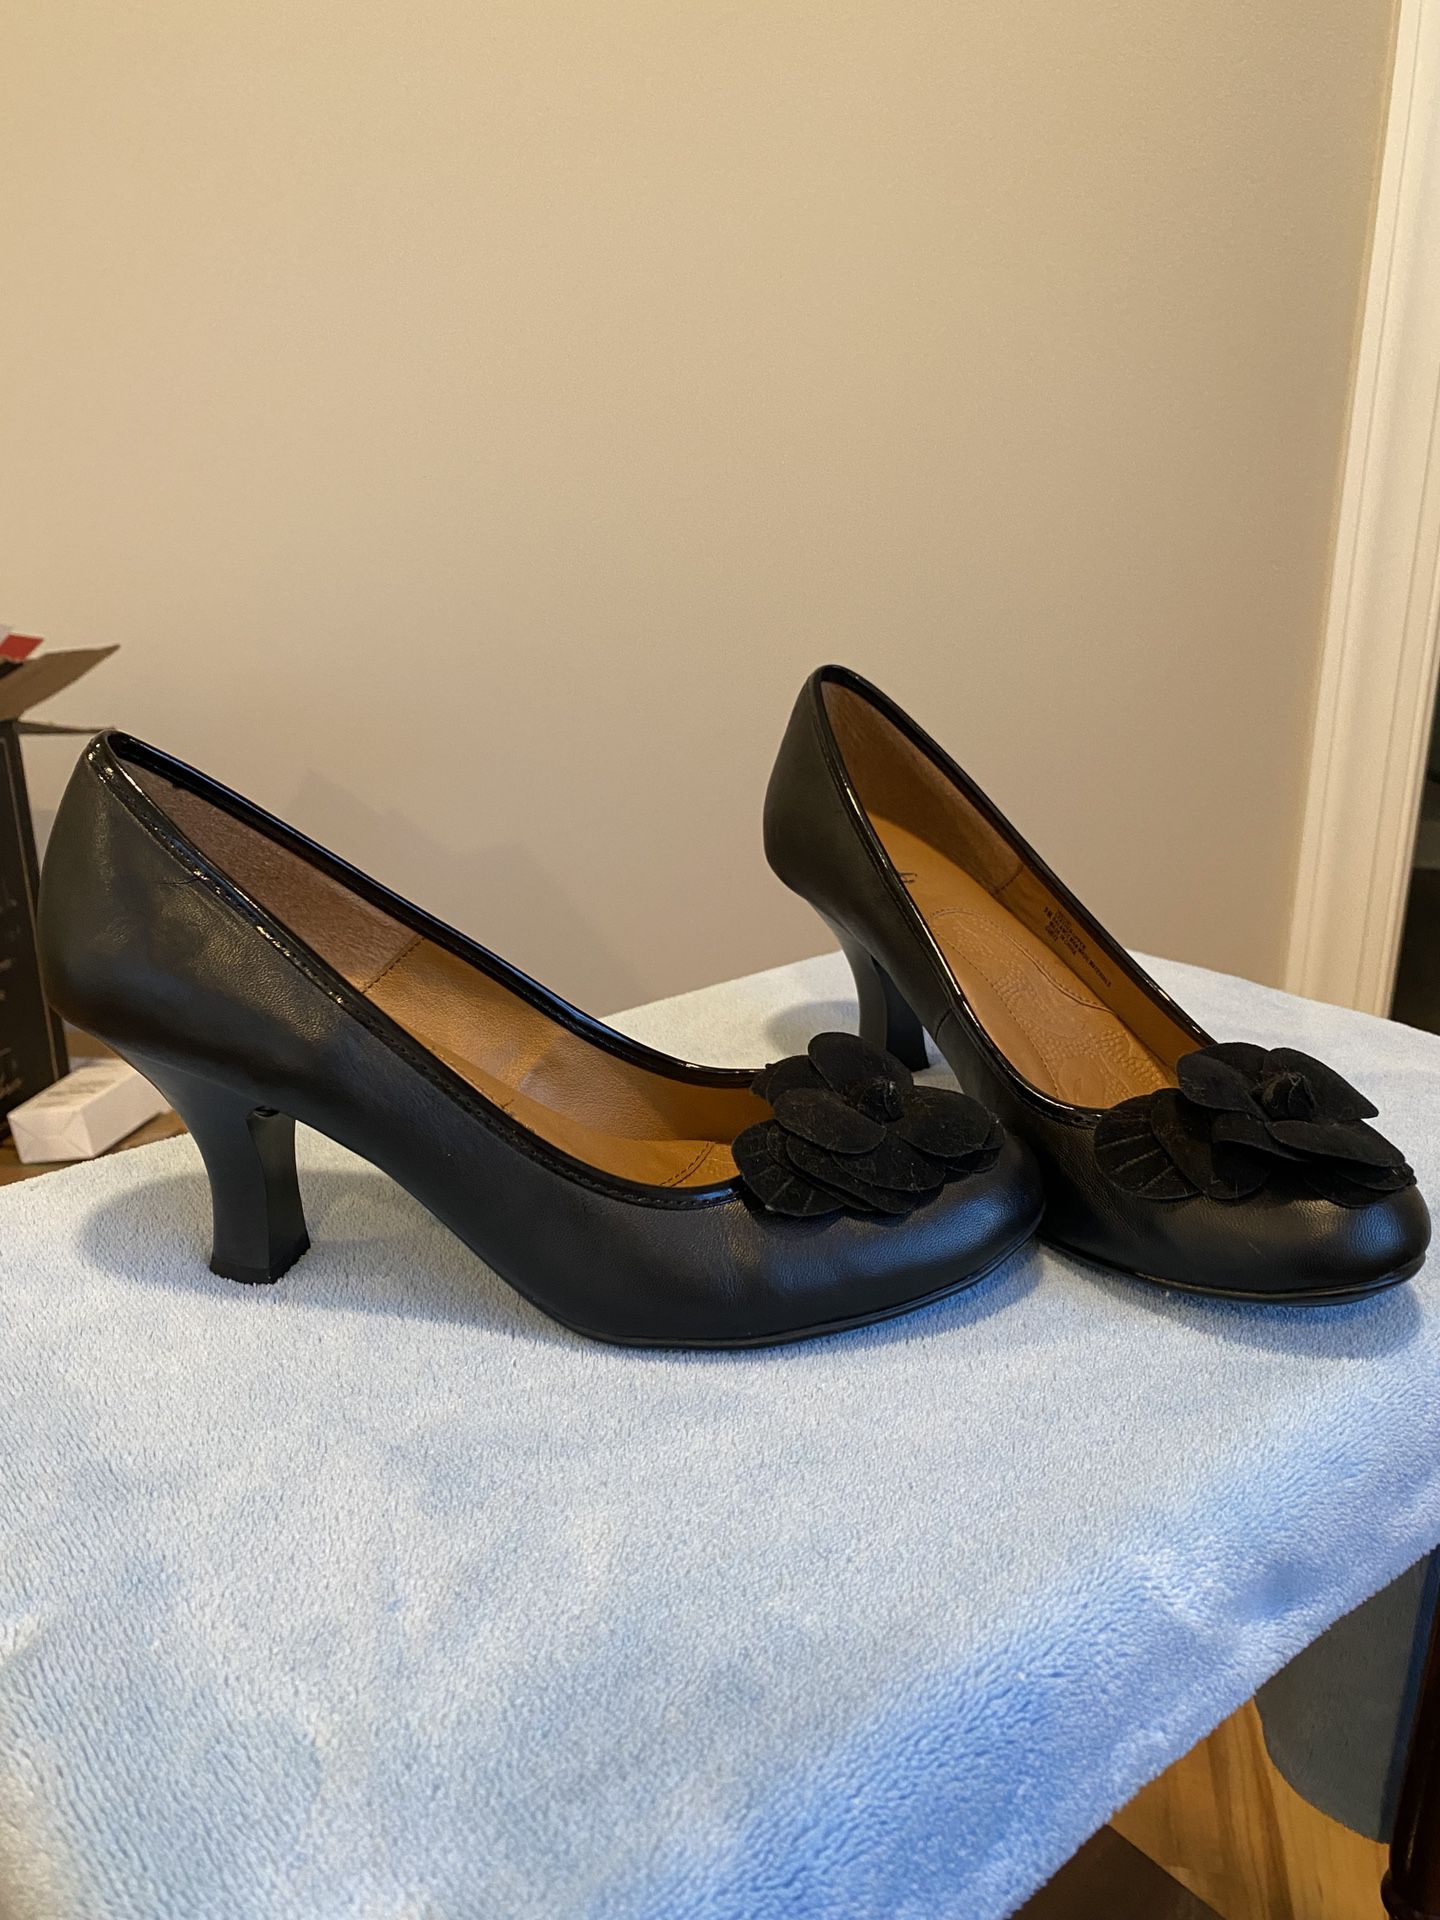 Eürosoft Leather Pumps by Söfft Shoe Company With Suede Flower, Size 9